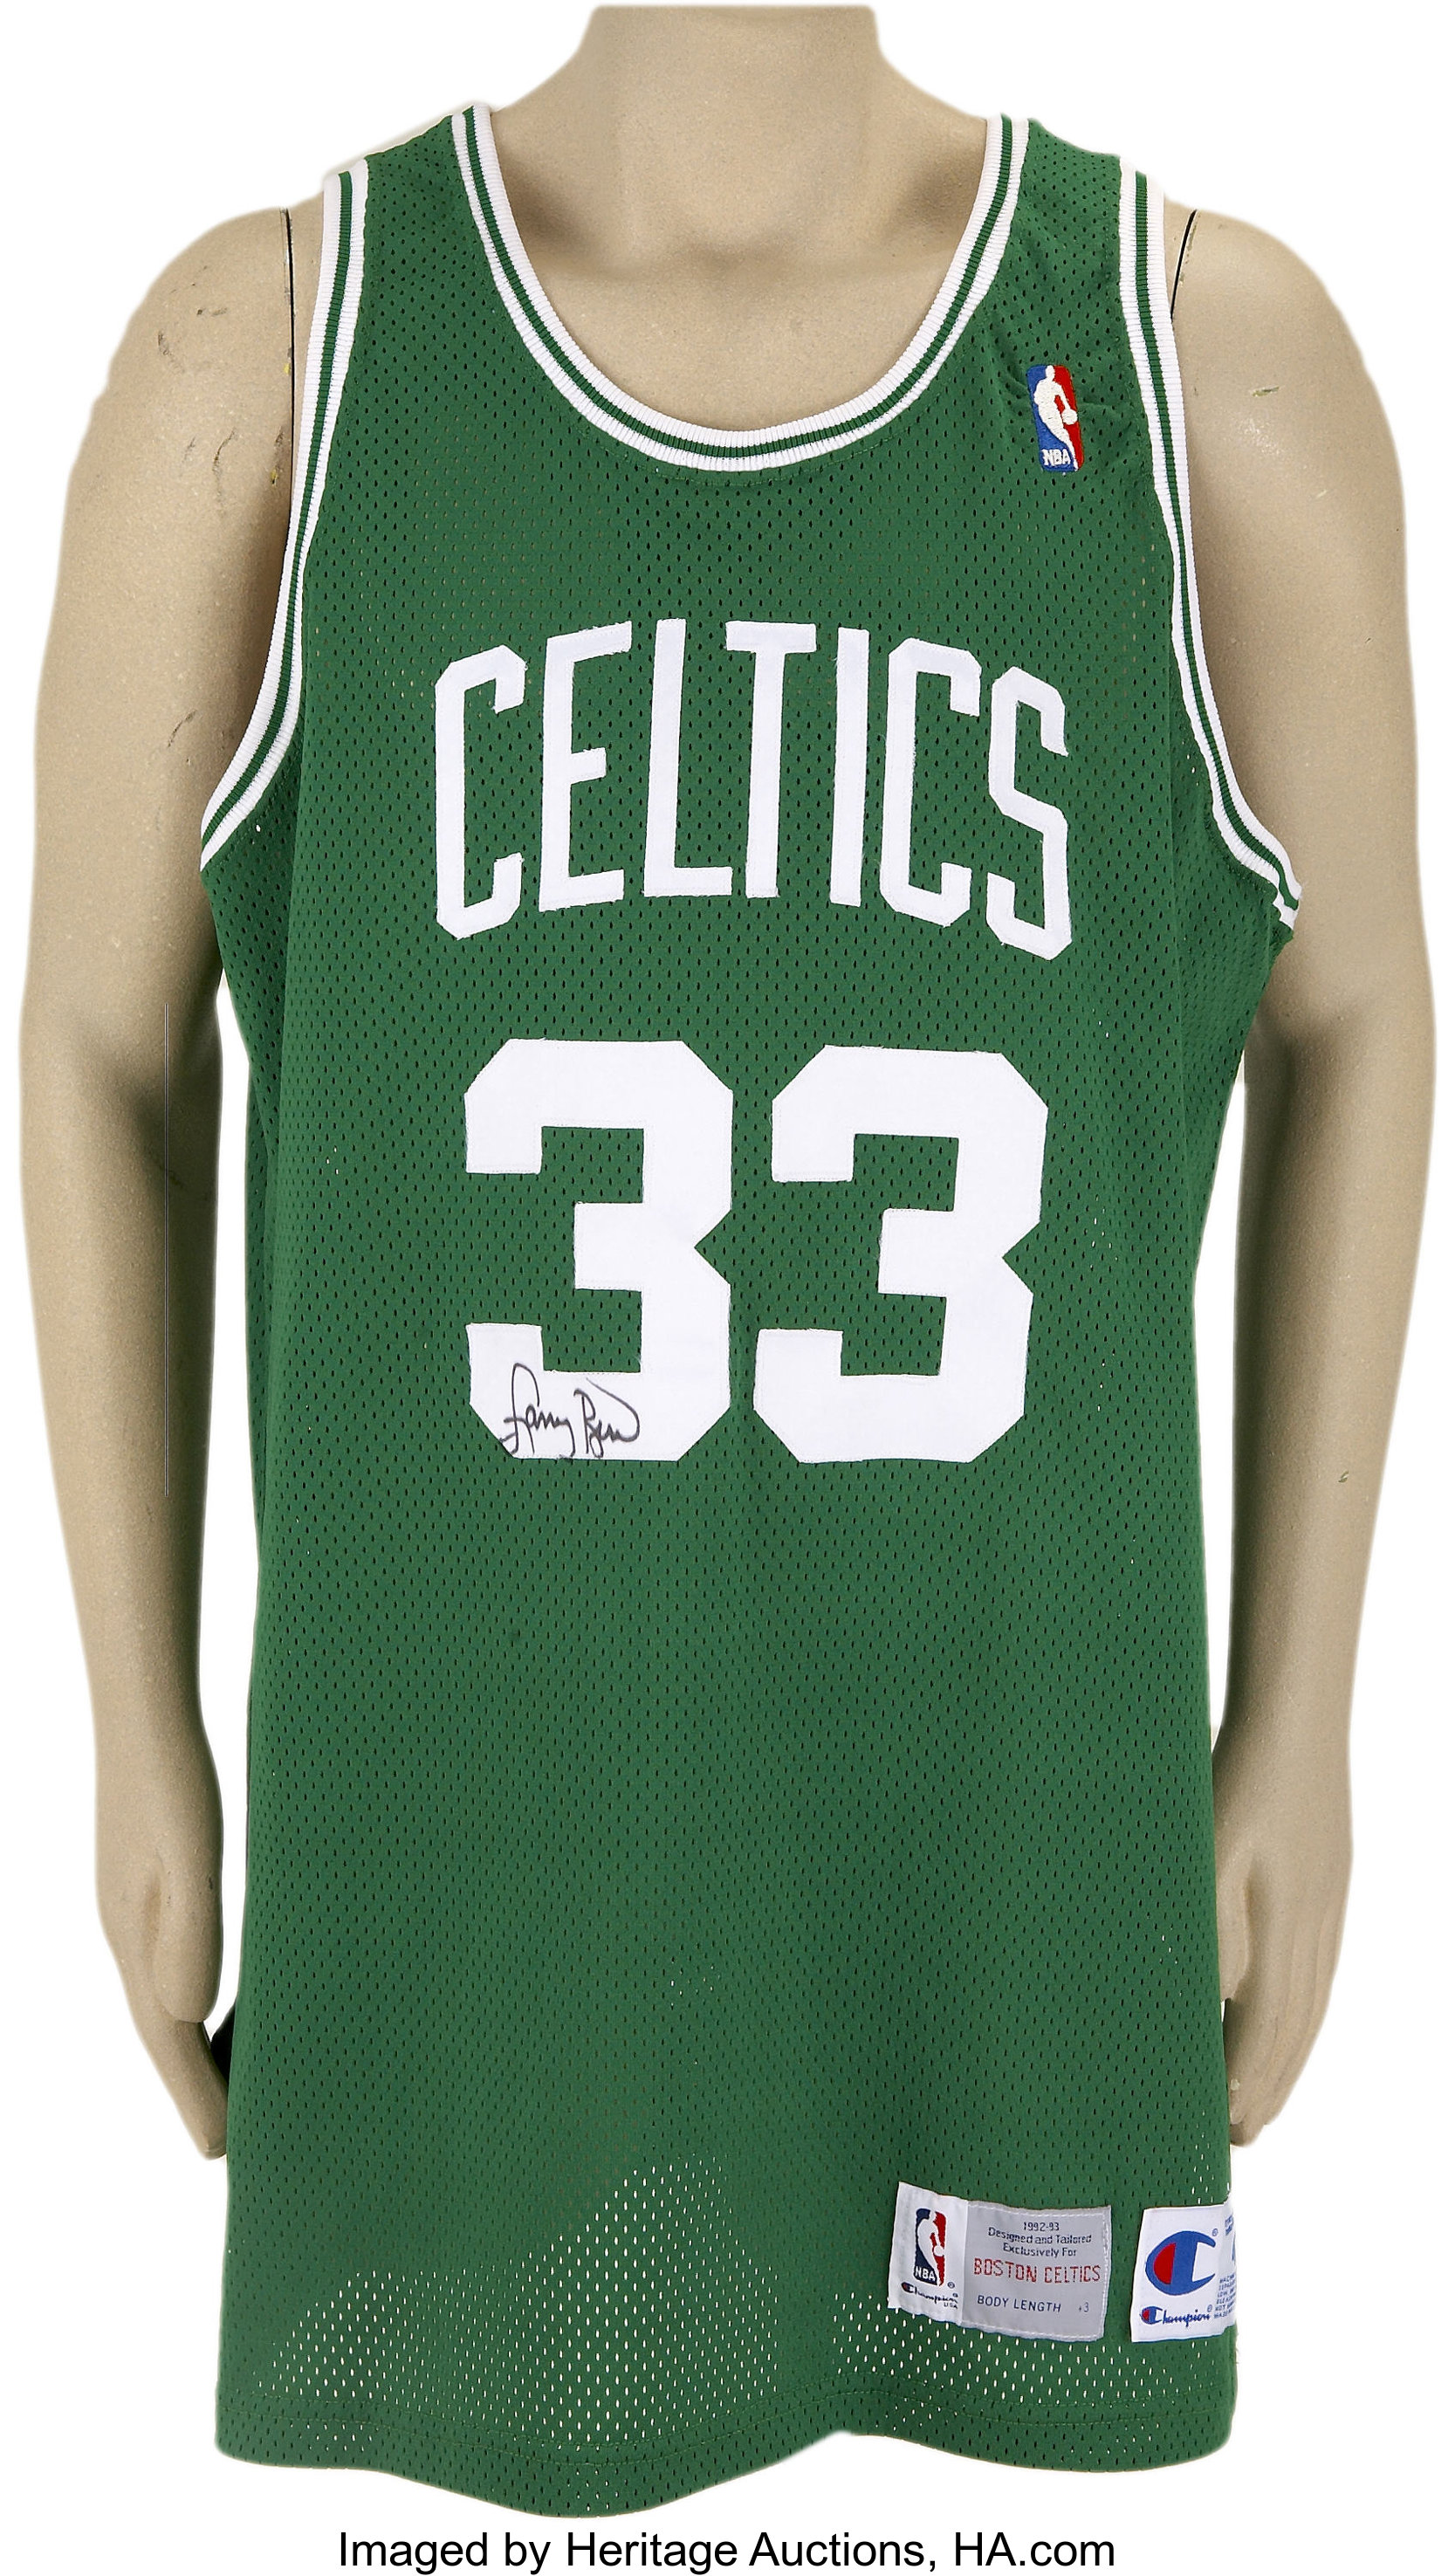 Larry Bird Signed Throwback All-Star Jersey. What we present here